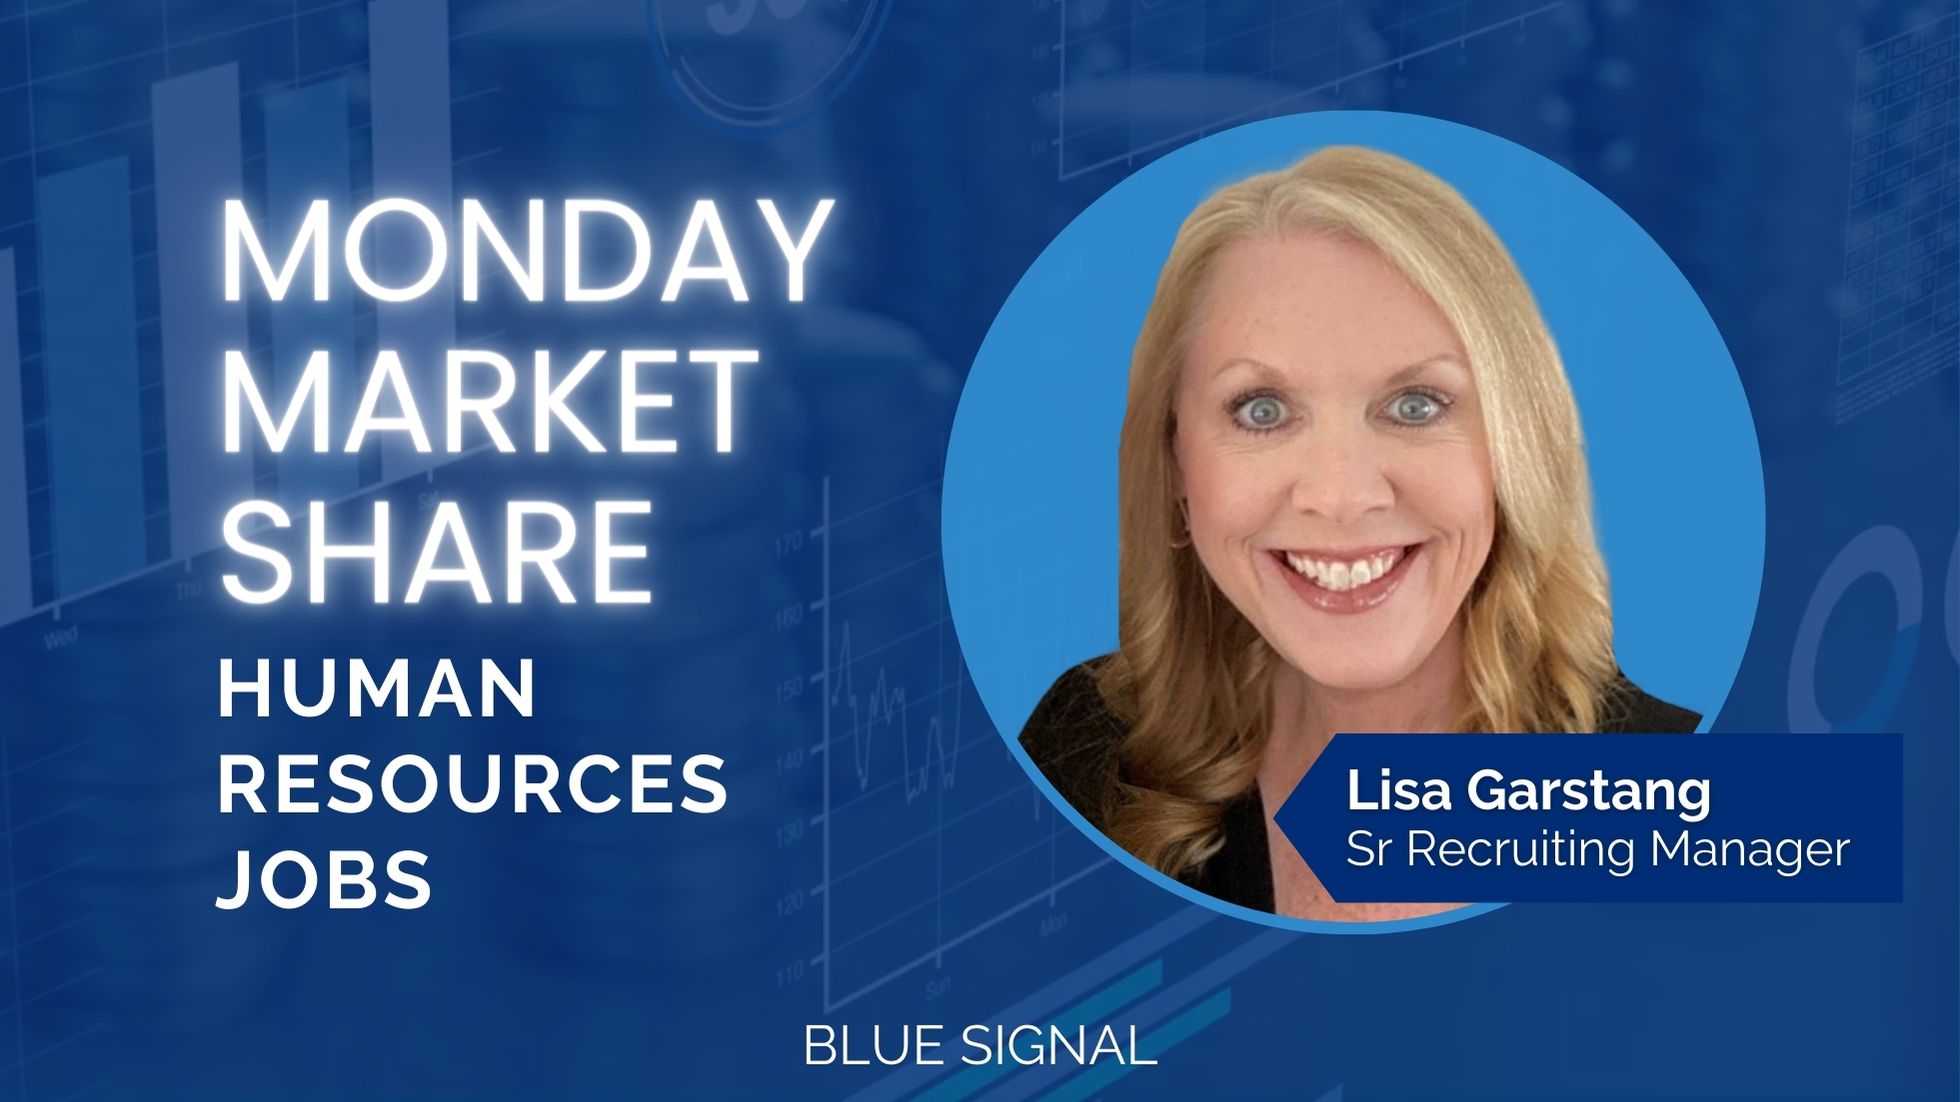 Blog banner showcasing the title "Monday Market Share, Featured Industry: Human Resources jobs, with Lisa Garstang" and includes a picture of recruiter Lisa Garstang.